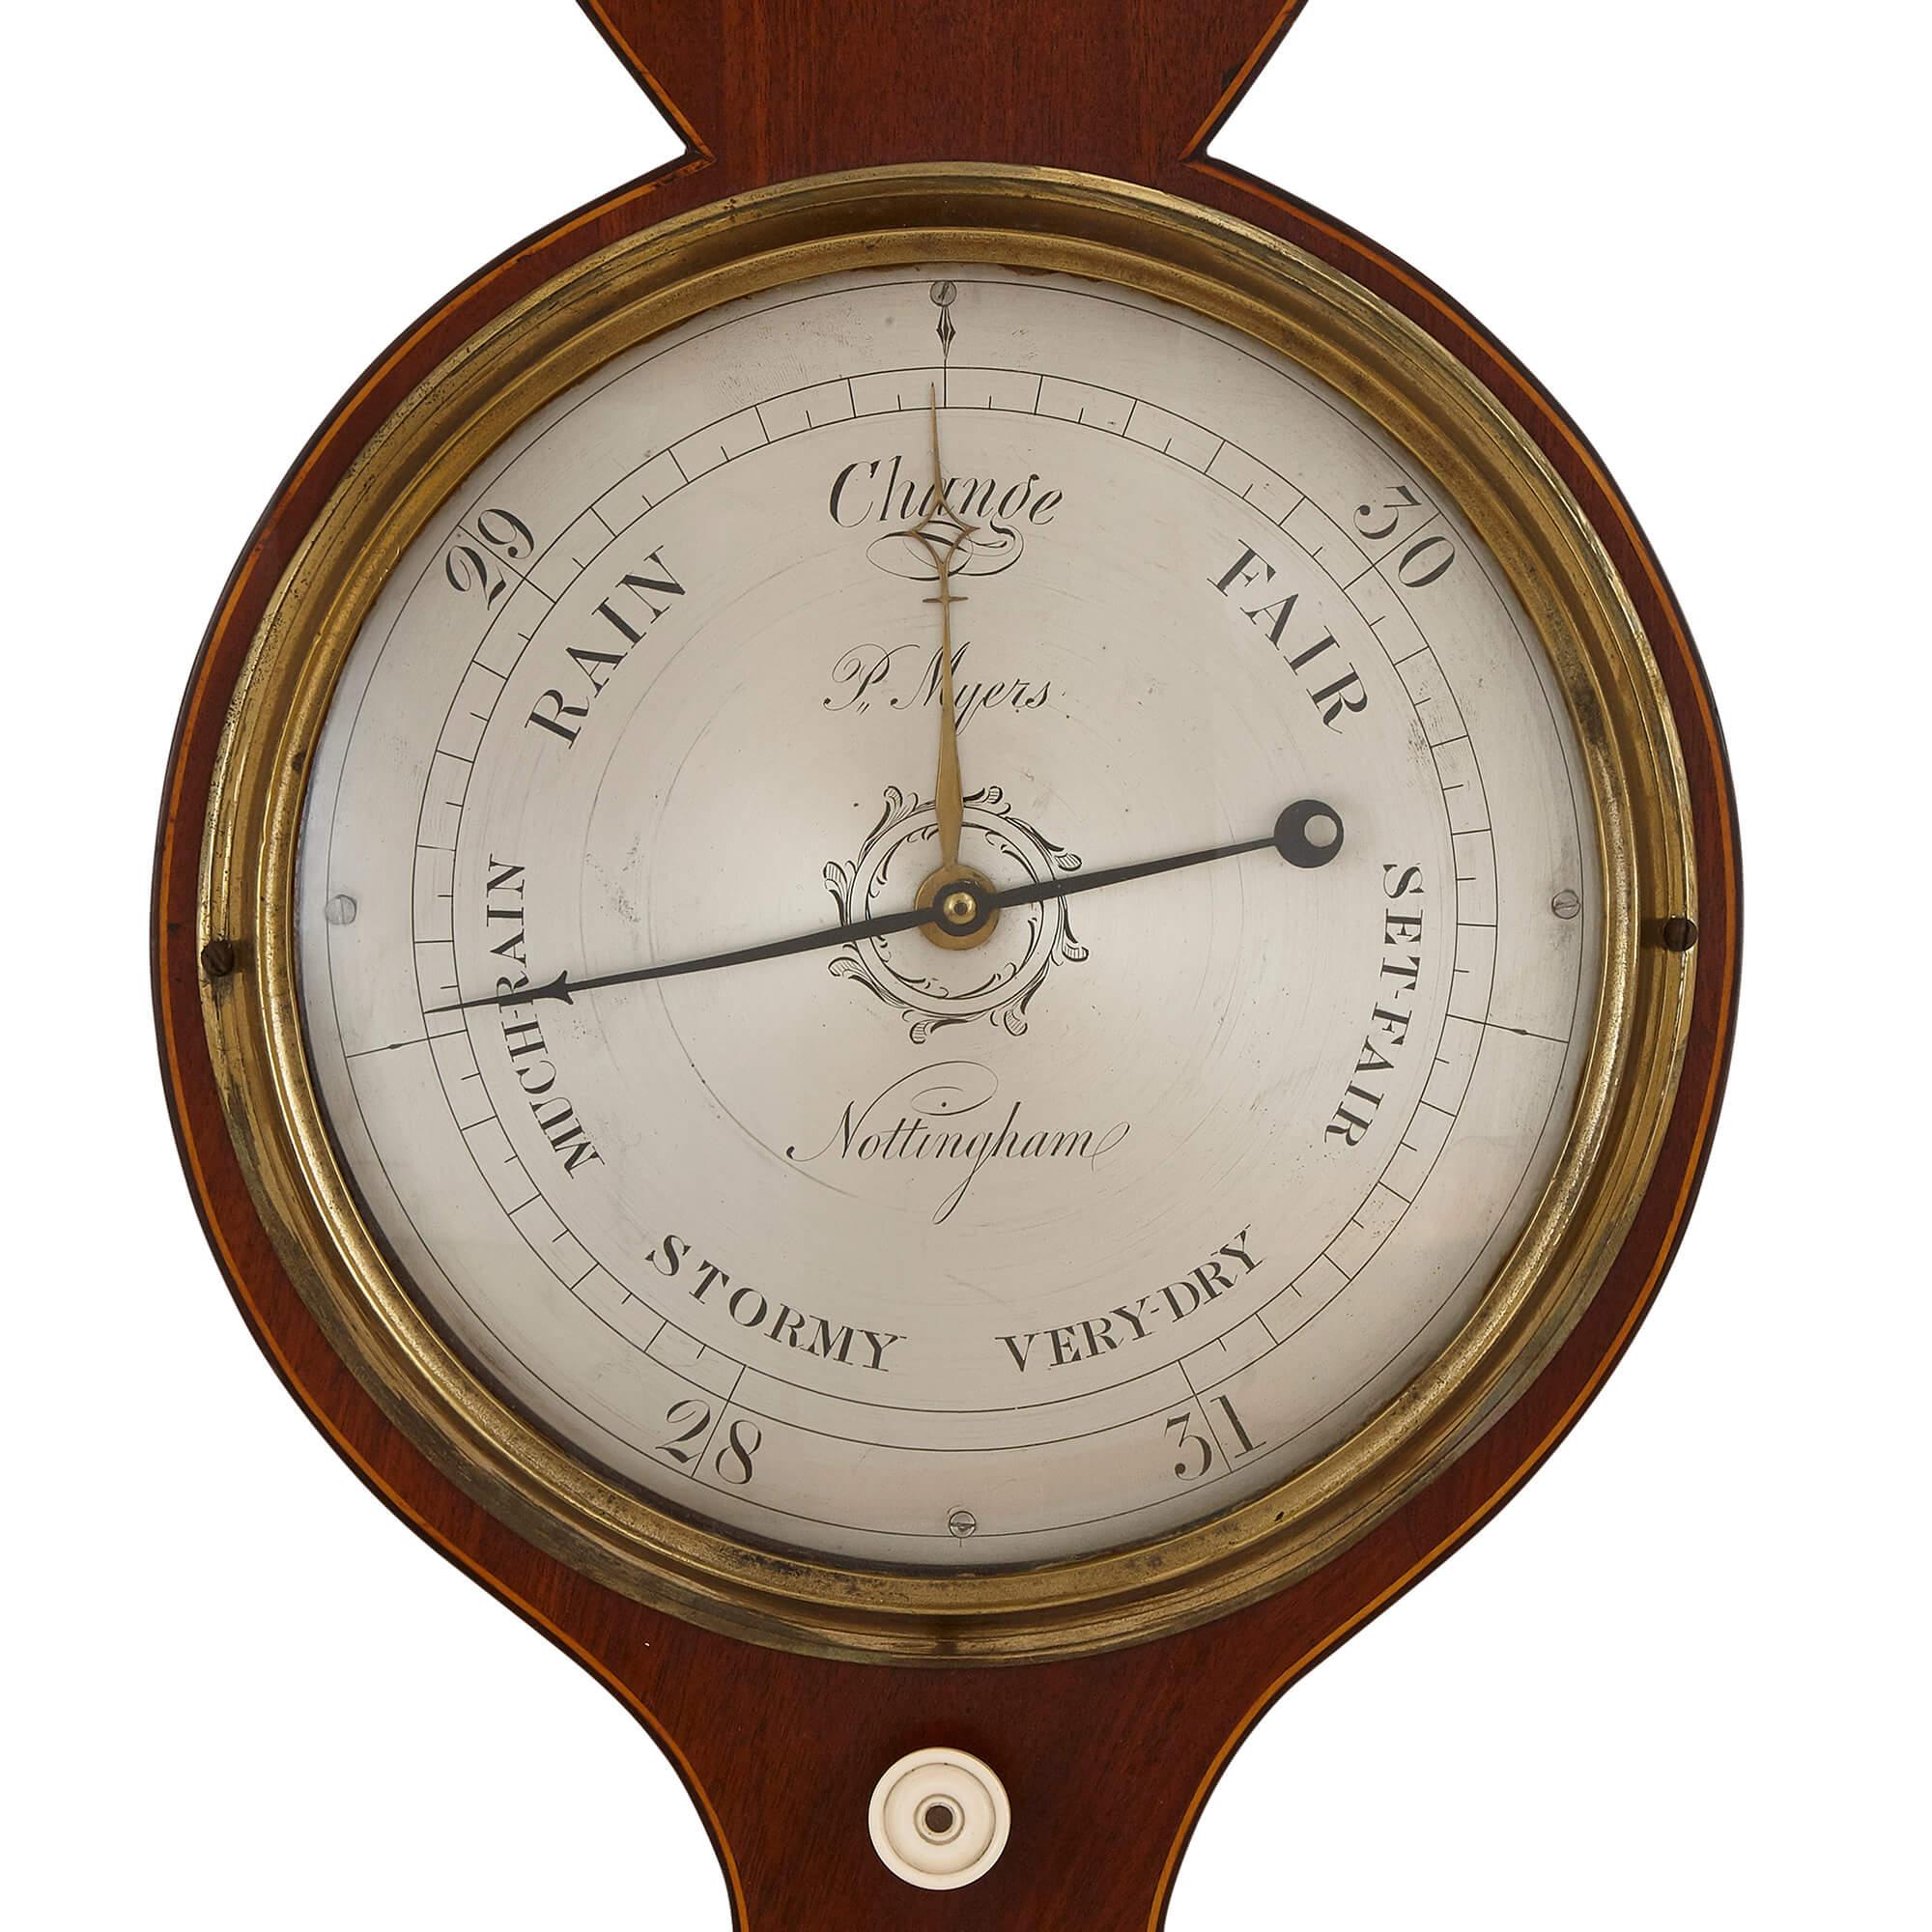 Victorian marquetry wall barometer and thermometer.
English, 19th century
Measures: height 98cm, width 25cm, depth 7cm.

This elegant piece is a fine example of Victorian period craftsmanship, and a demonstration of the taste for scientific